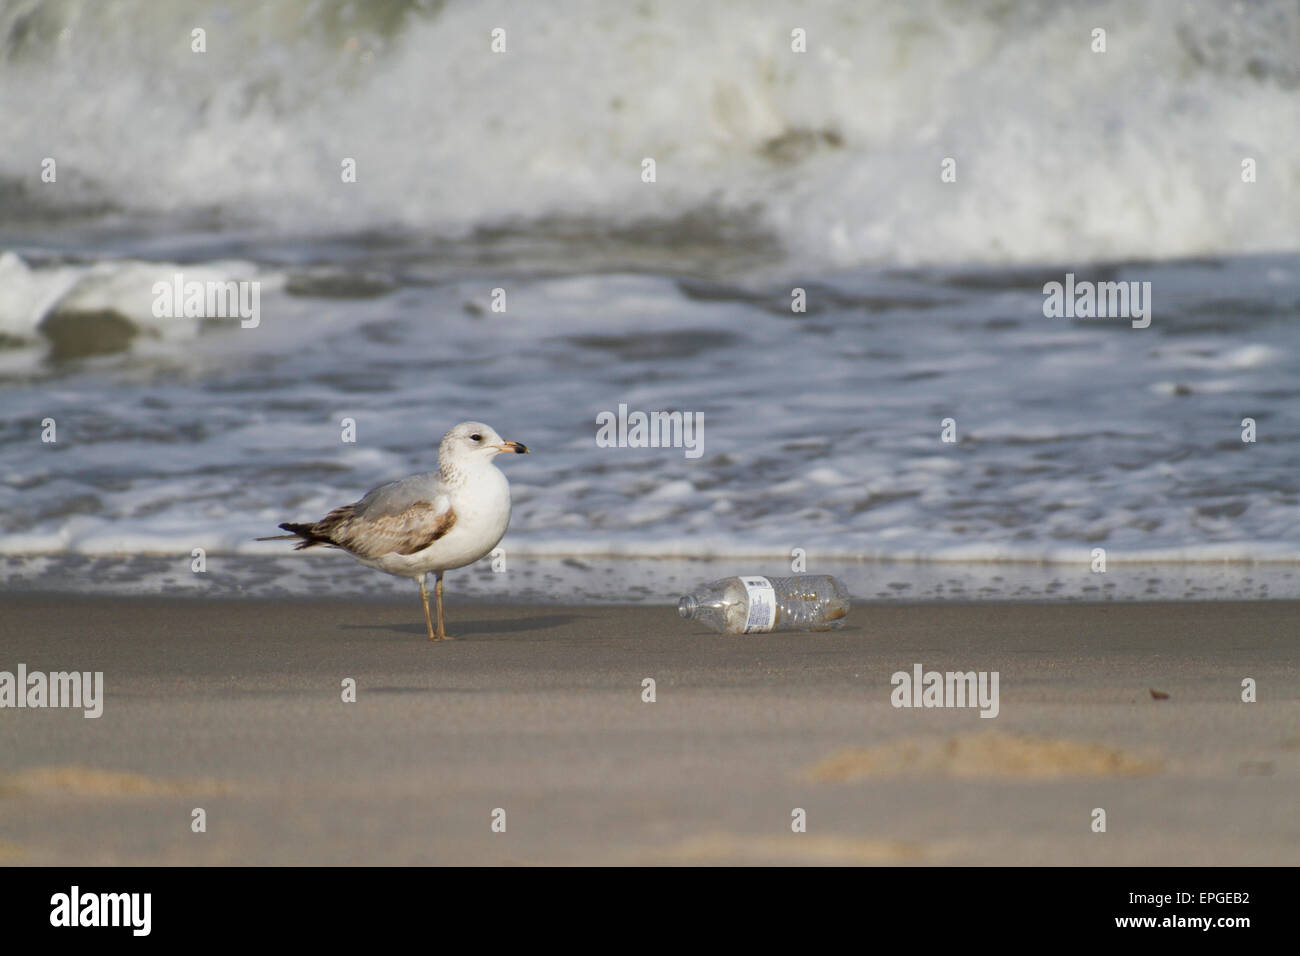 A seagull stands next to a plastic bottle washed up on the beach by the tide Stock Photo